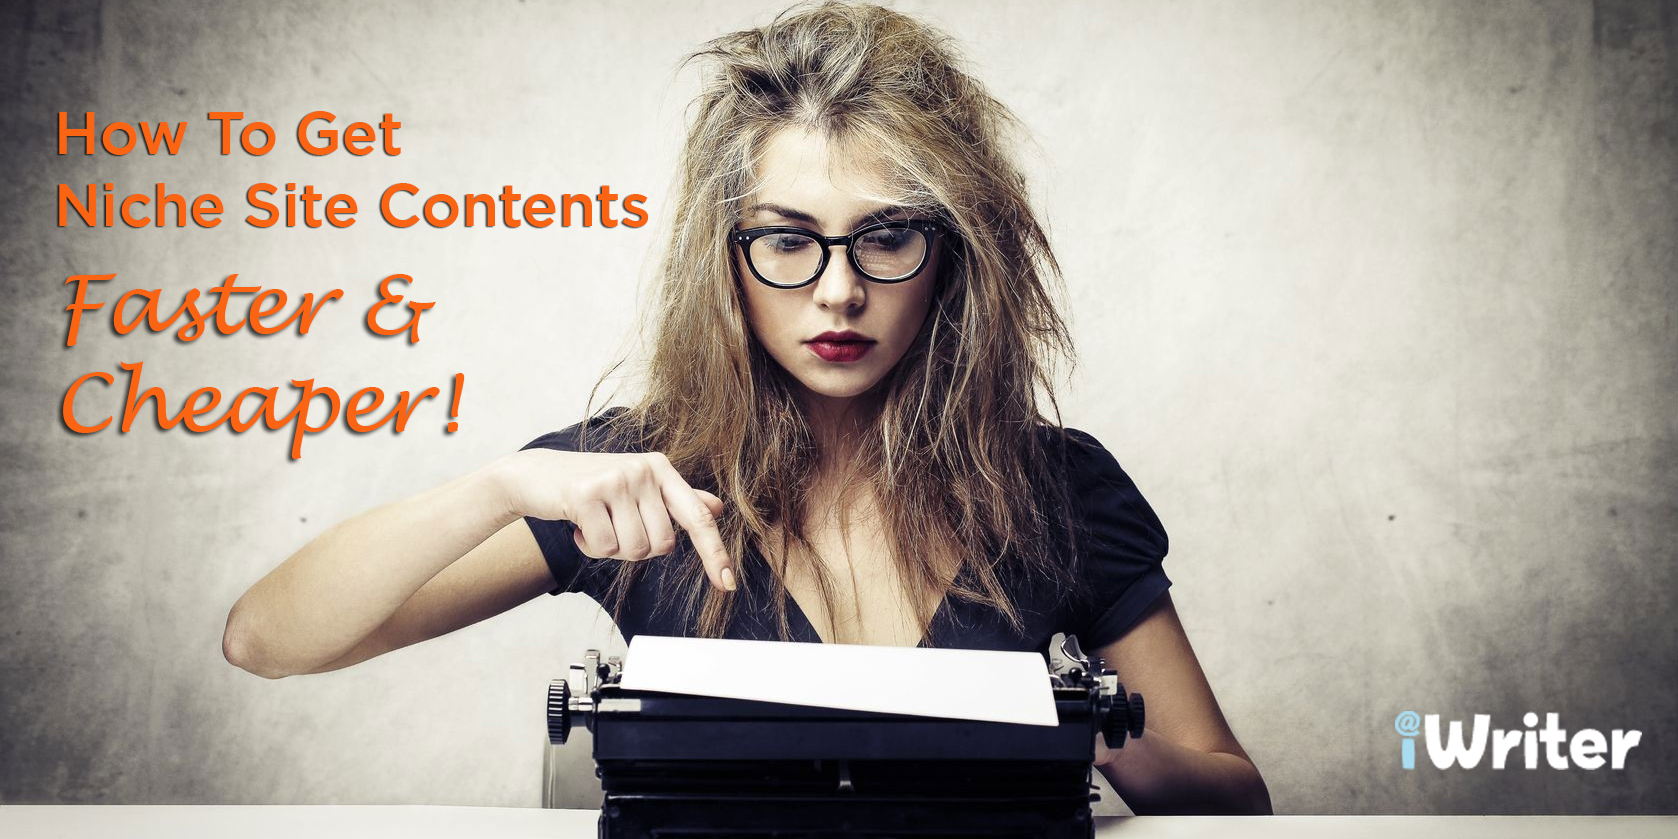 How to Hire Freelance Content Writers for Niche Websites